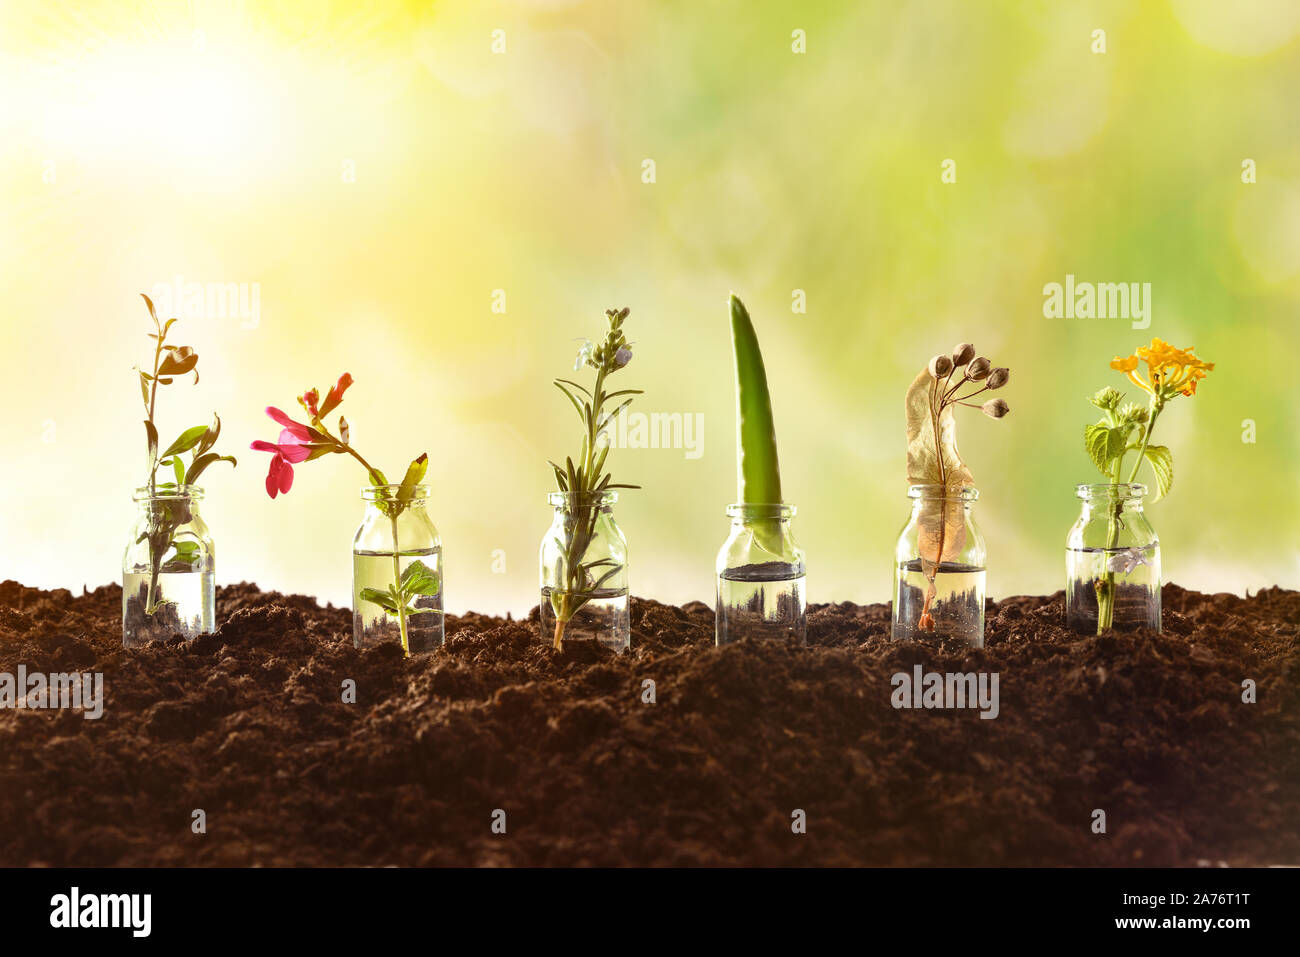 Bottles with essence liquid and plants inside on soil and green nature background. Alternative natural medicine concept. Front view. Horizontal compos Stock Photo